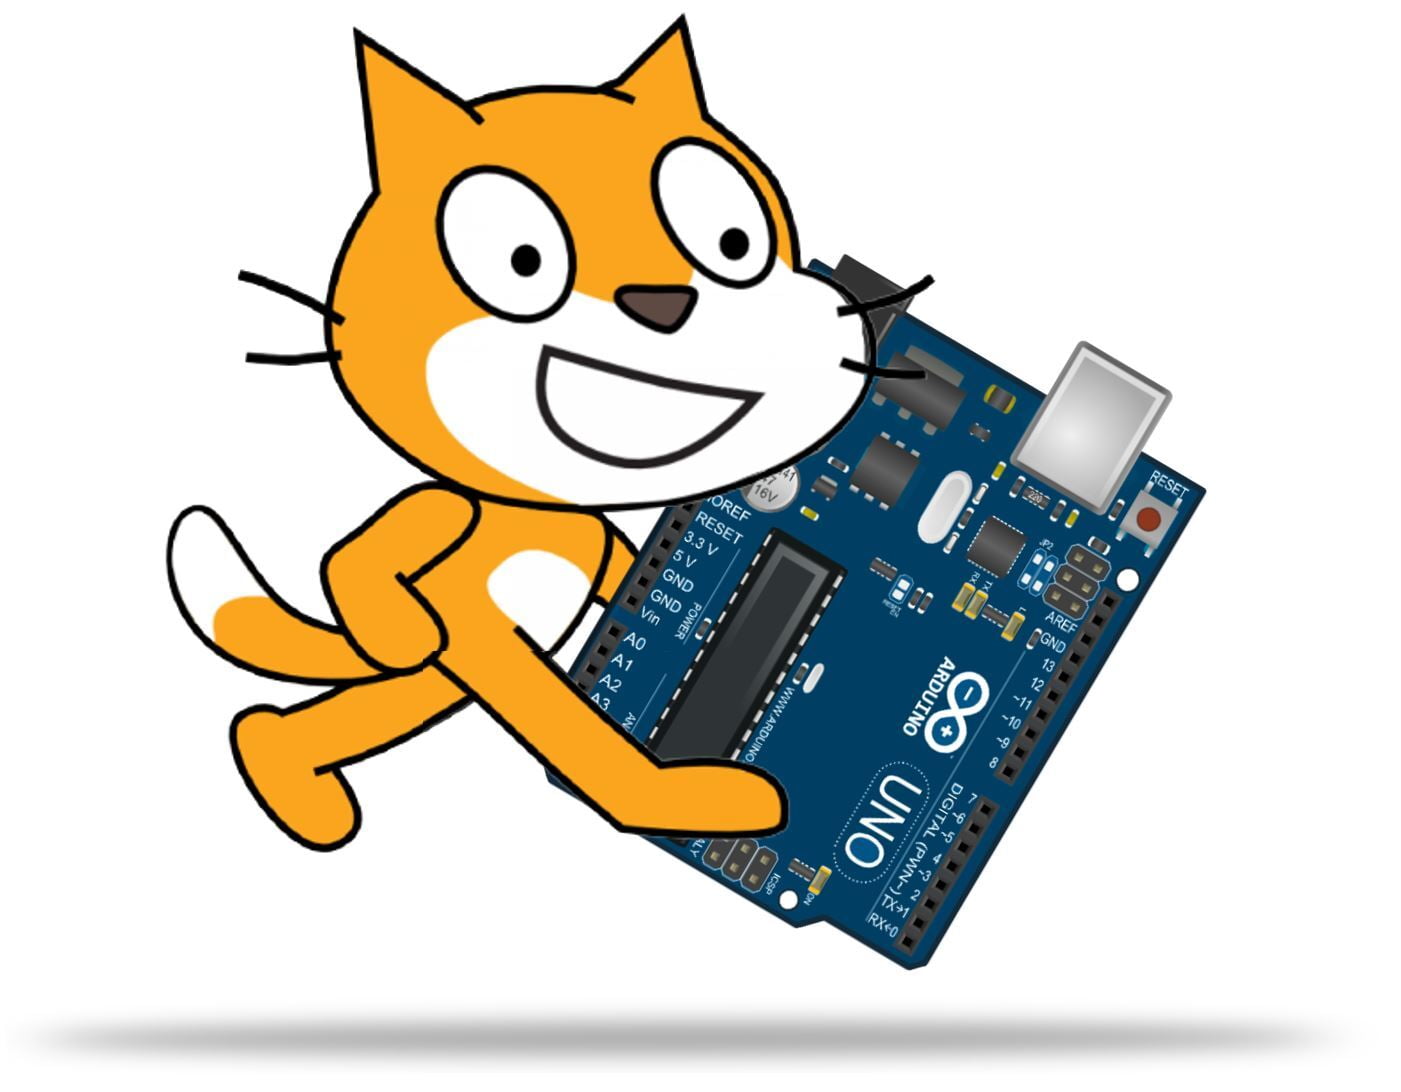 https://www.edjoyeducation.com/images/Scracth%20-%20Arduino%20Overview%202.JPG